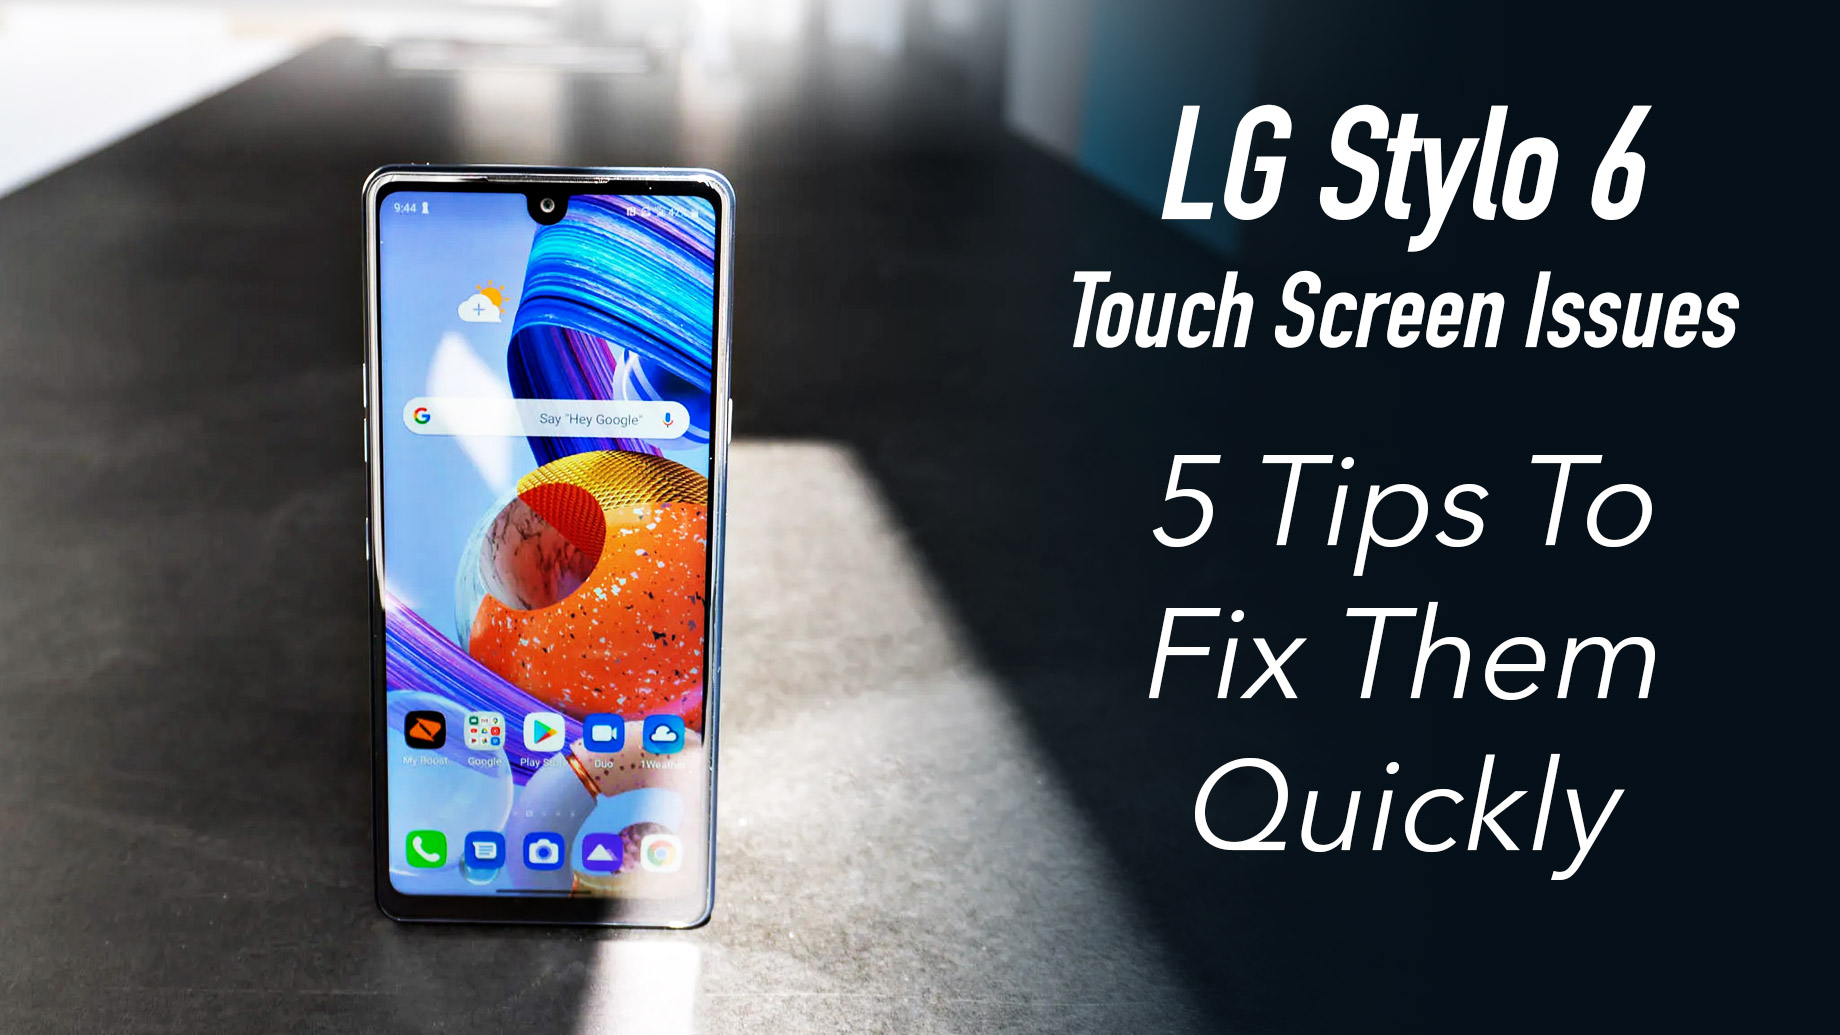 LG Stylo 6 Touch Screen Issues - 5 Tips To Fix Them Quickly